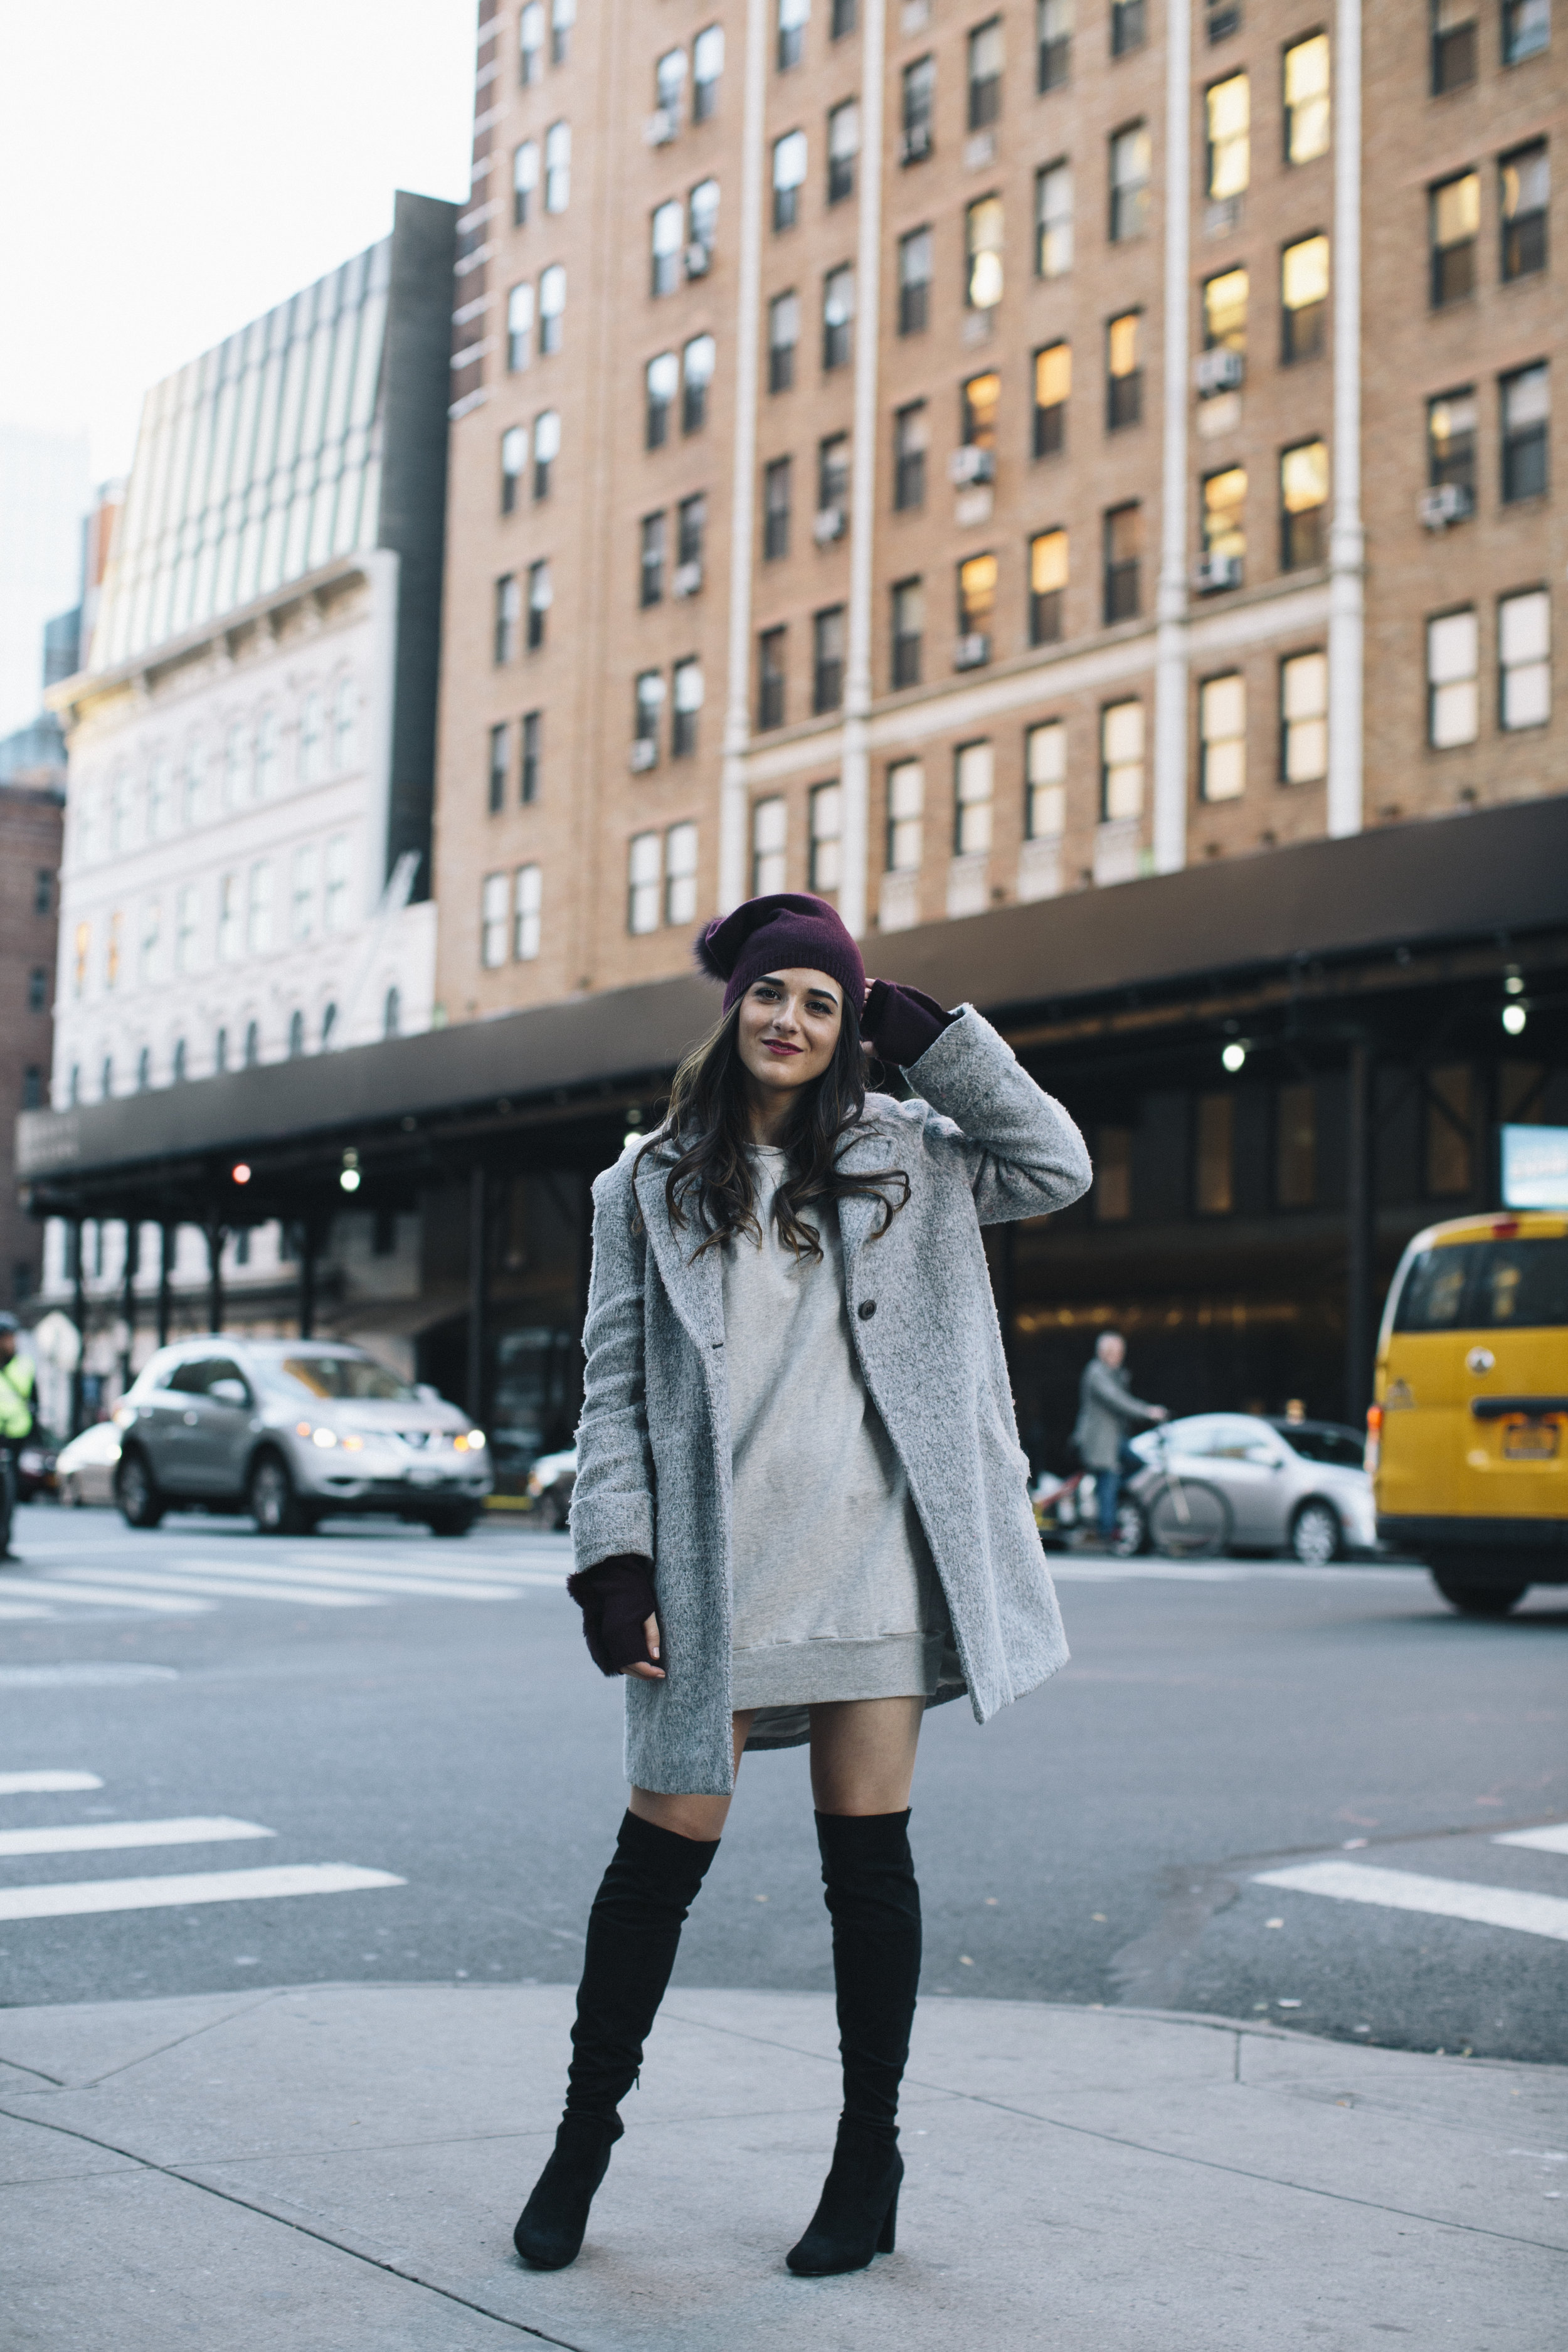 Cashmere Hat And Glove Set Piccolo New York Louboutins & Love Fashion Blog Esther Santer NYC Street Style Blogger Outfit OOTD Trendy Winter Wear Cold Weather Online Shopping Holiday Season Grey Coat Zara Sweatshirt Dress Girls OTK Black Boots Buy Cozy.jpg